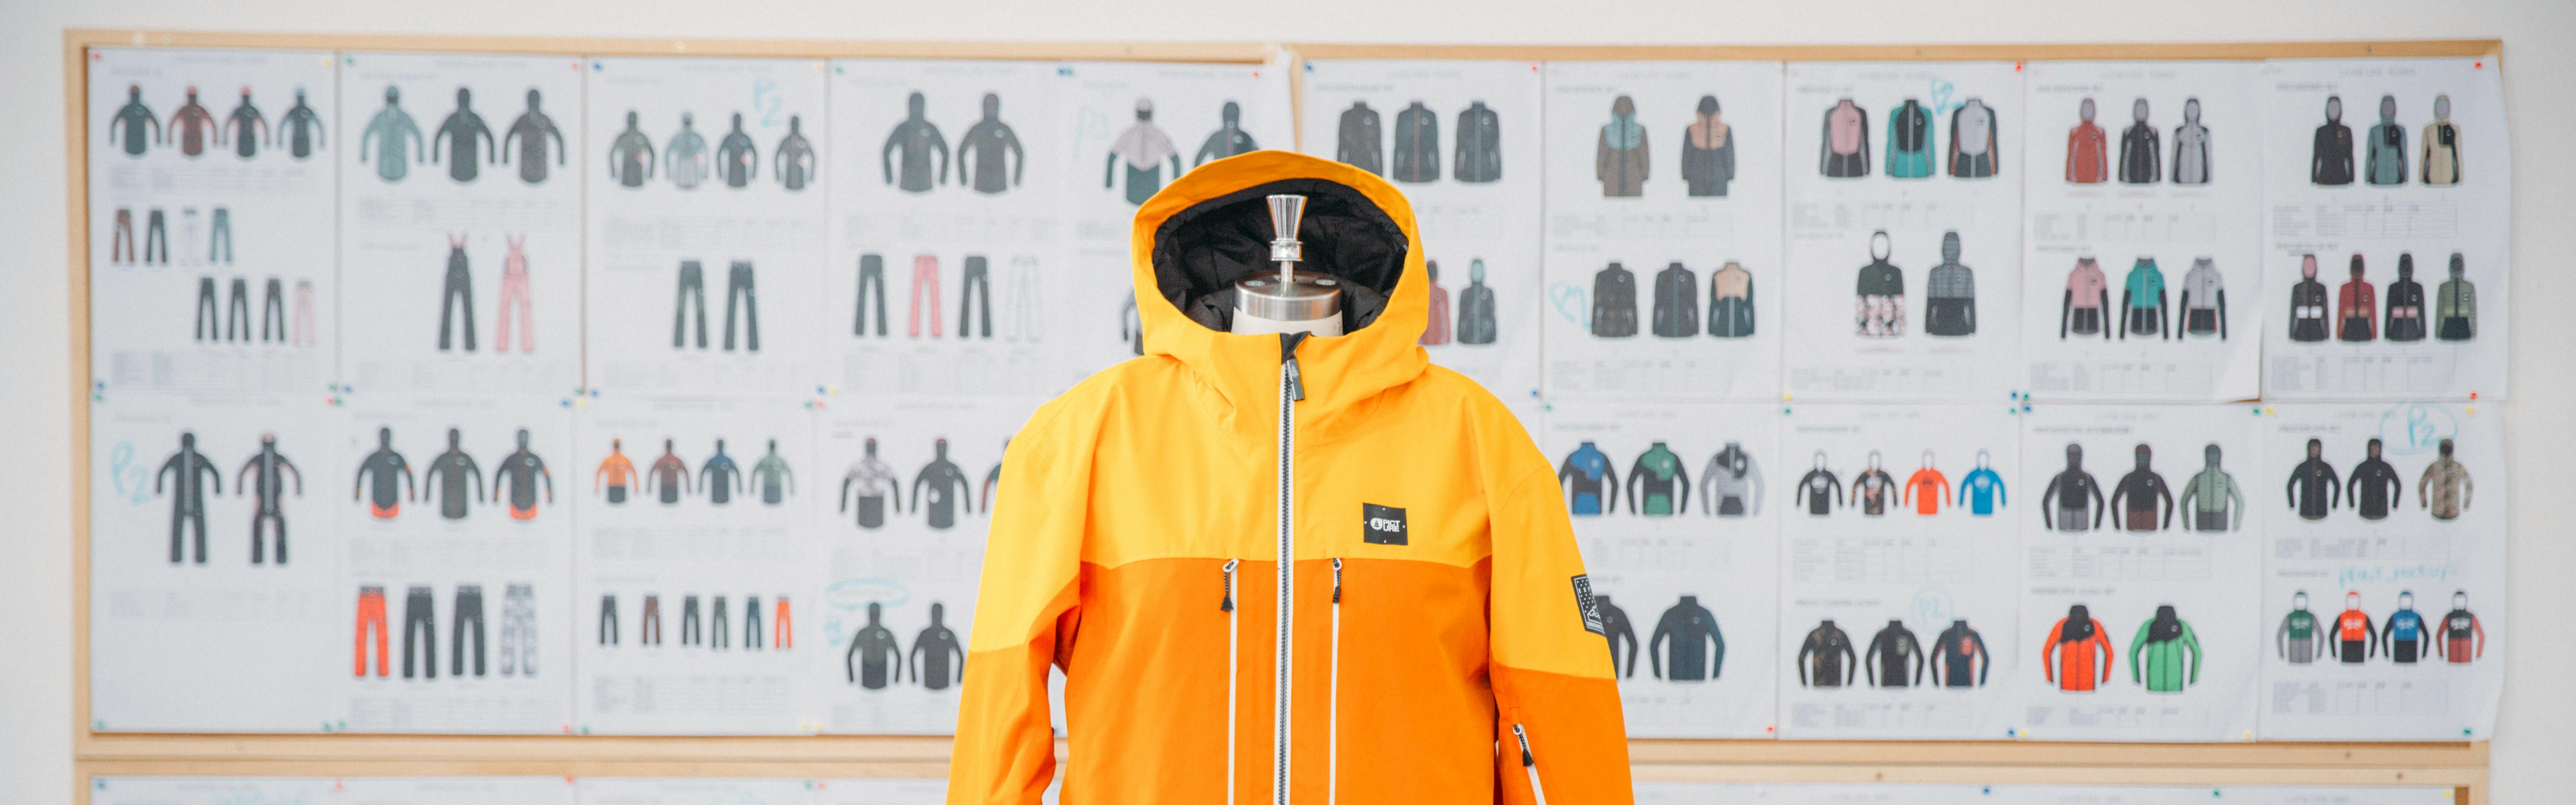 A bright orange jacket with a product design poster on the wall in the background